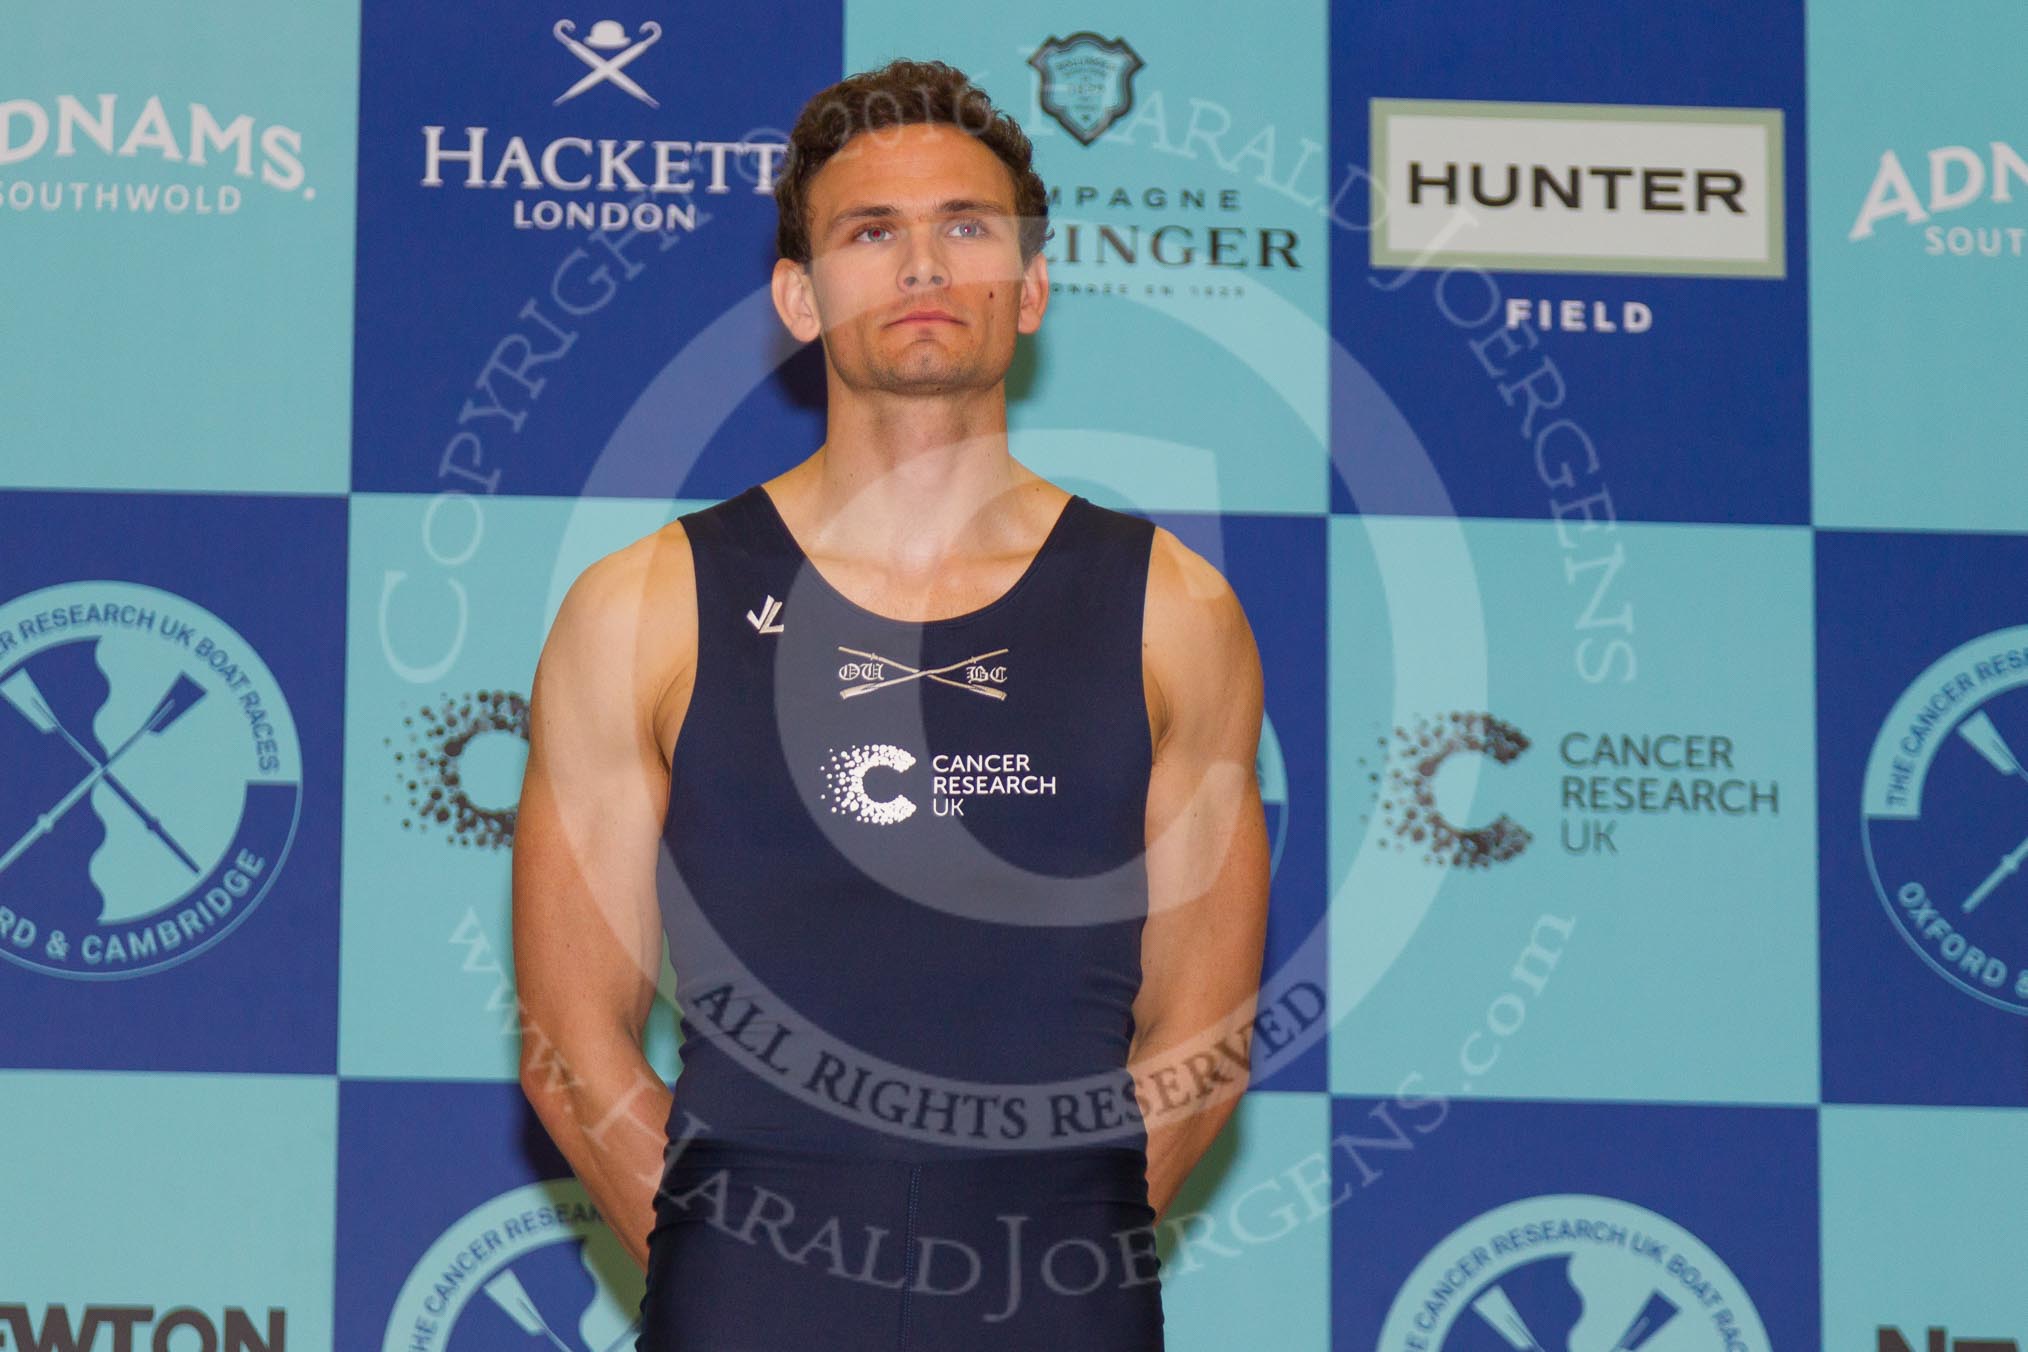 The Boat Race season 2016 - Crew Announcement and Weigh-In: The Boat Race, 4 seat: Oxford: Joshua Bugajski  – 96.4kg.
Westmister Hall, Westminster,
London SW11,

United Kingdom,
on 01 March 2016 at 10:20, image #62